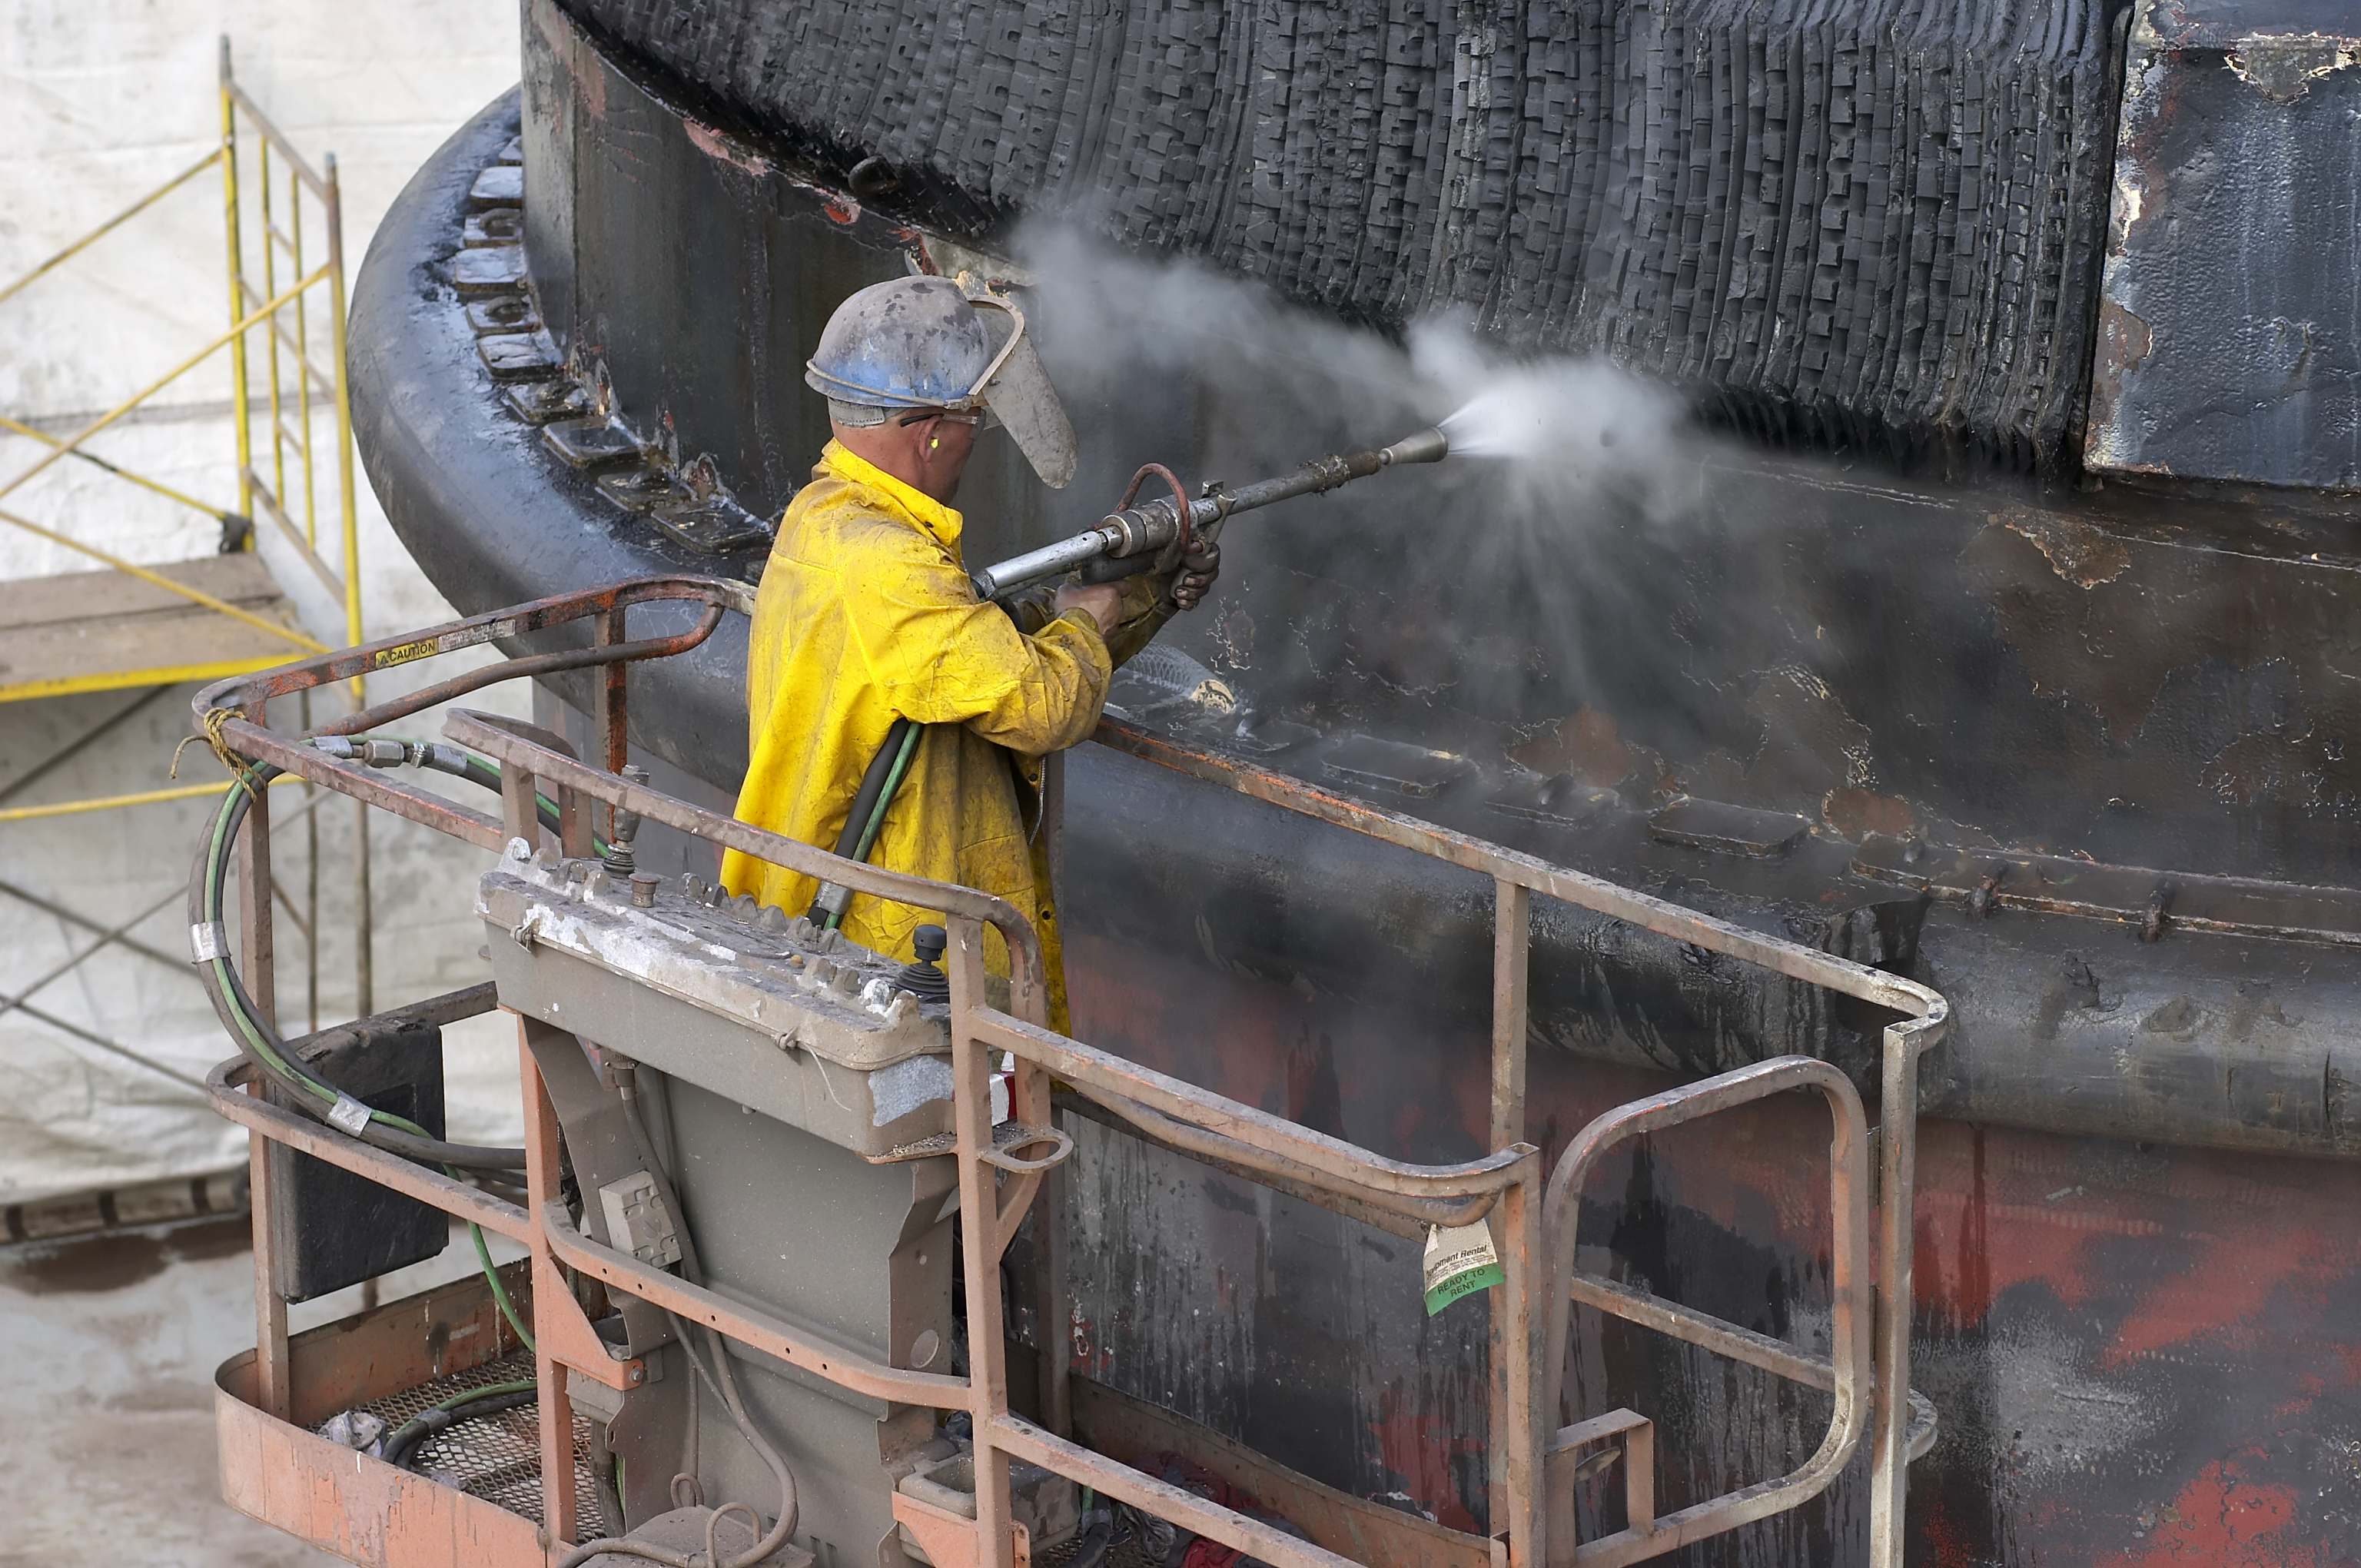 A man in the centre of the image is wearing a dark blue, metal helmet and a yellow, long-sleeved jacket. He is facing away and is holding a dark grey blasting machine. He's blasting water onto a large, cylinder structure which has a dark, flaking coating.